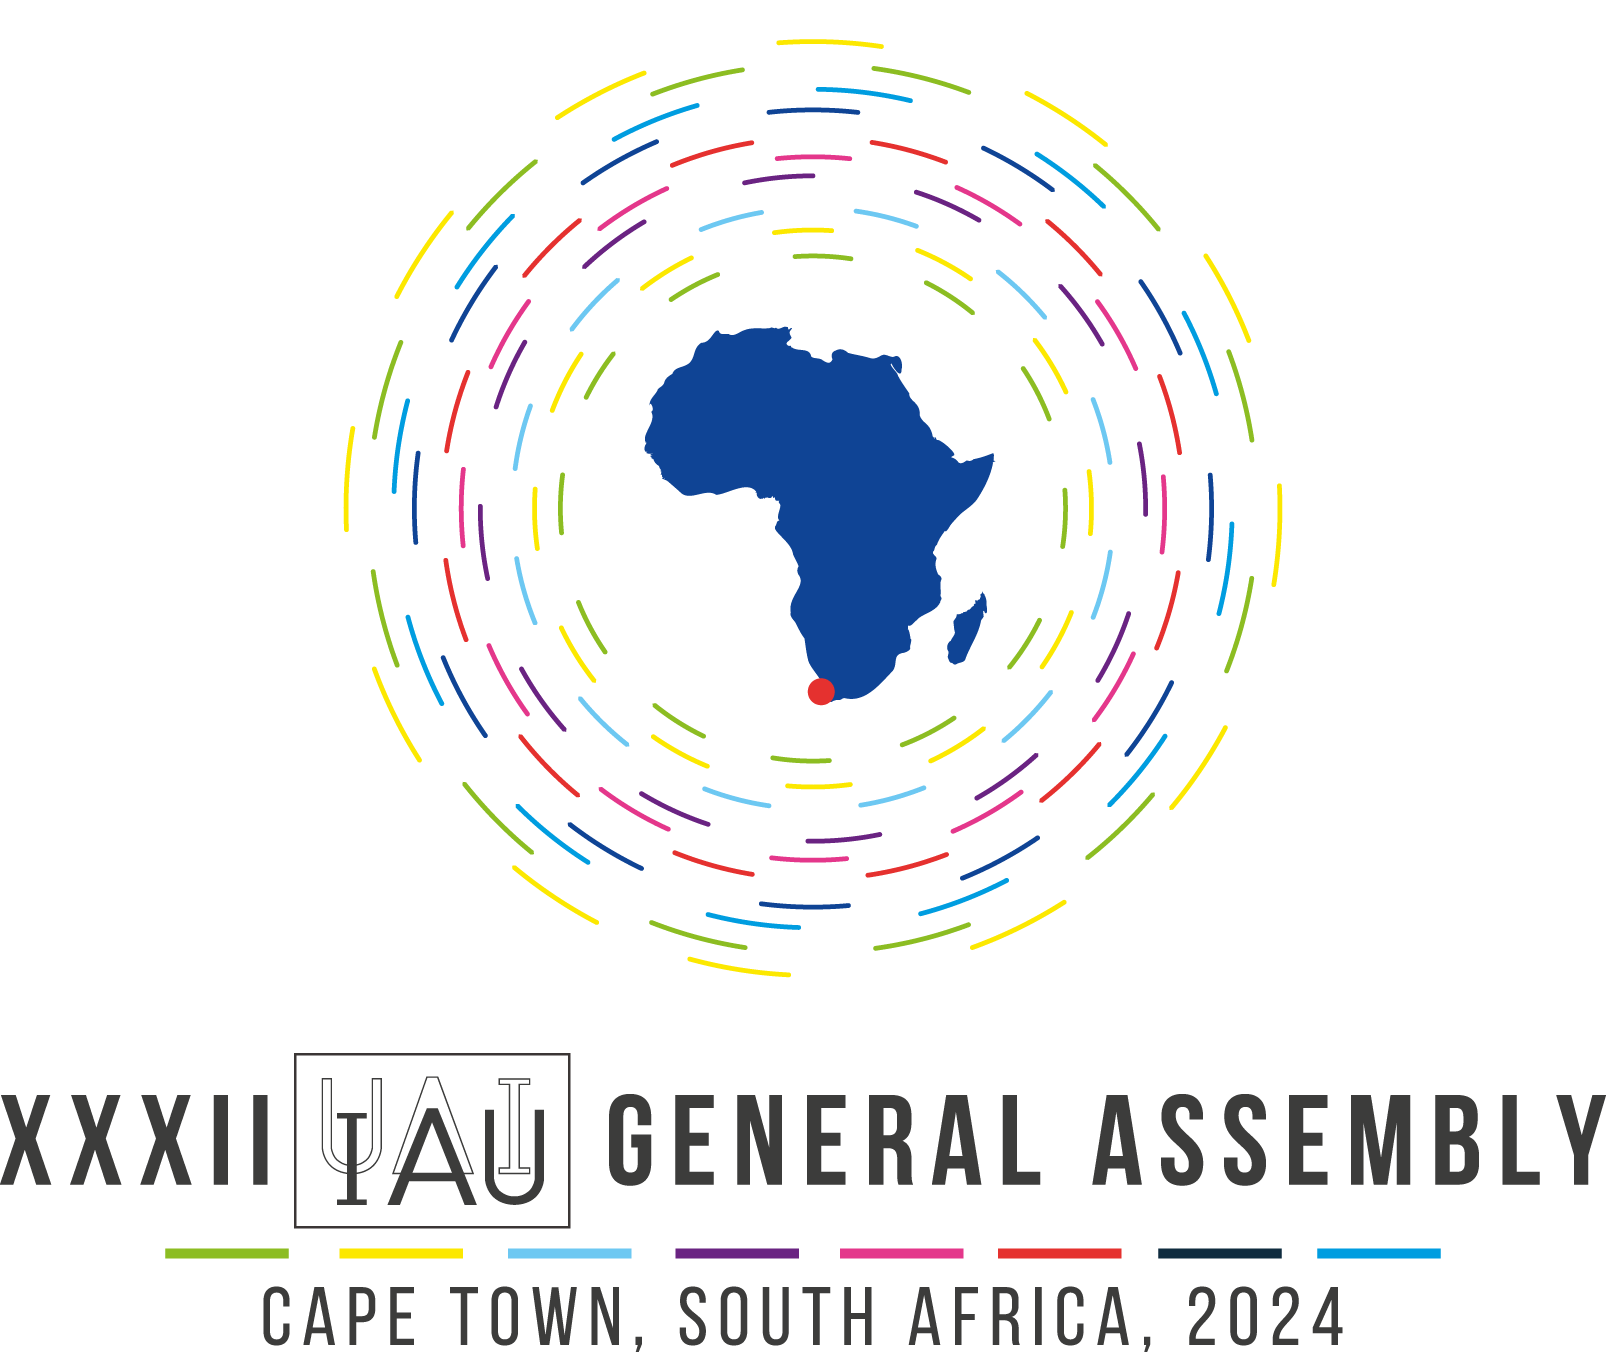 Abstract Submission Now Open for the 2024 IAU General Assembly